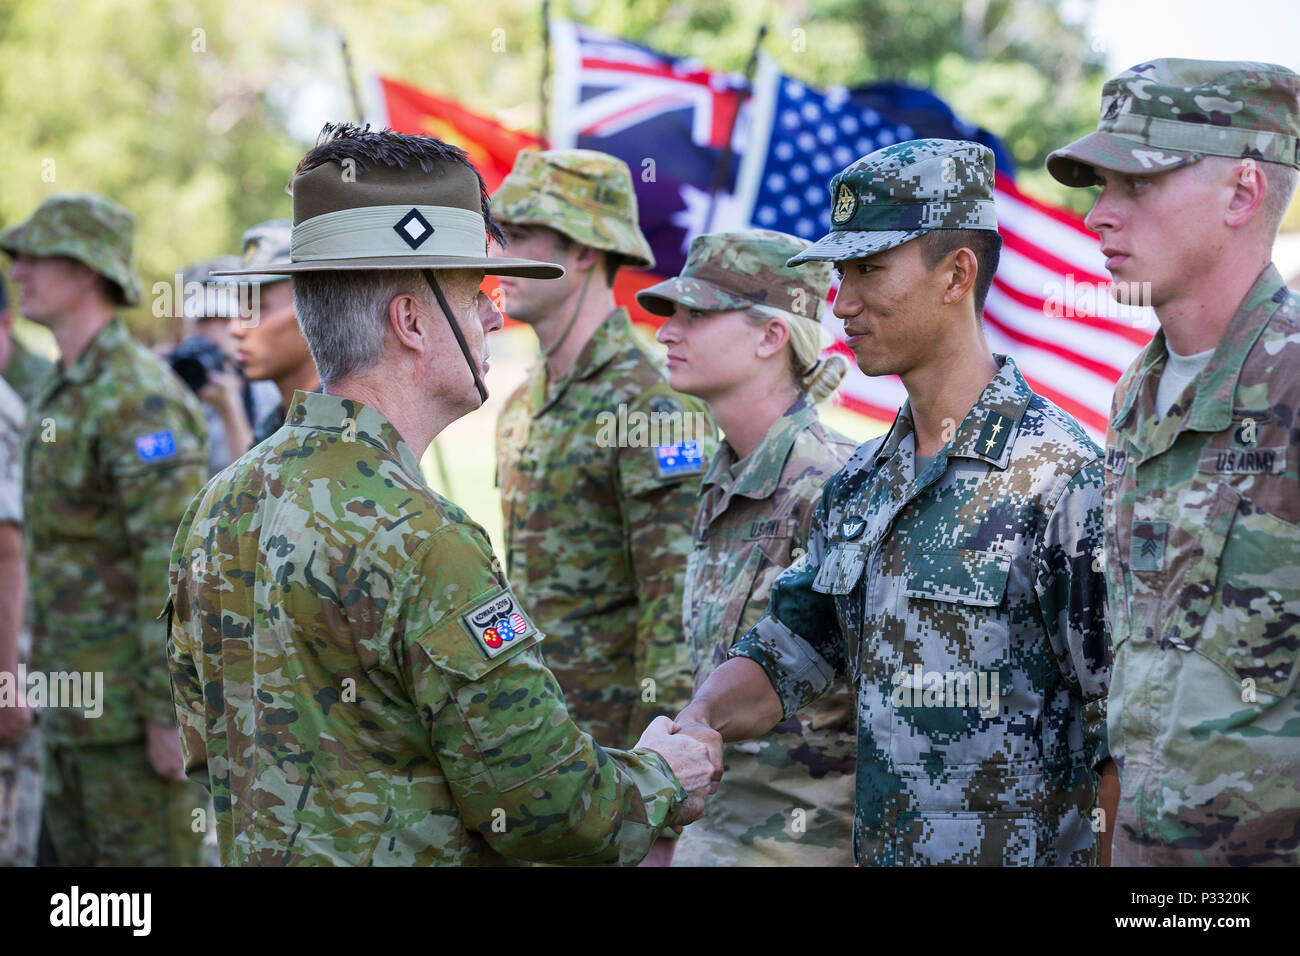 Australian Army officer Brigadier Cantwell, AM, Deputy Commander 2nd Division, shakes hands with a soldier from Chinese People's Liberation Army during the Exercise Kowari opening ceremony at Larrakeyah Barracks in